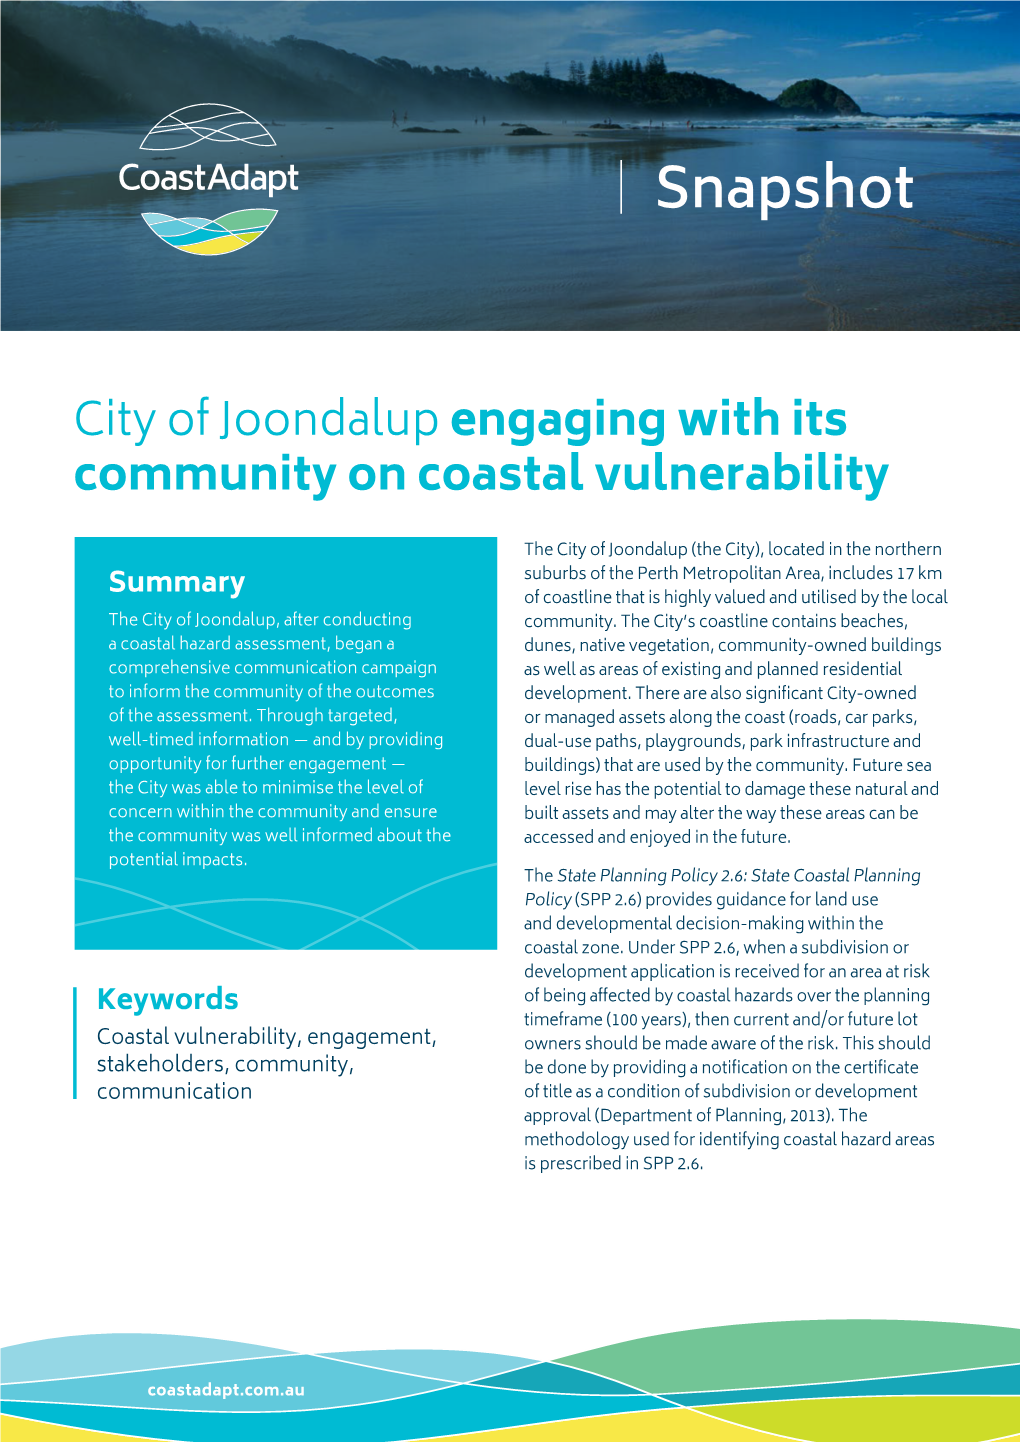 City of Joondalup Engaging with Its Community on Coastal Vulnerability